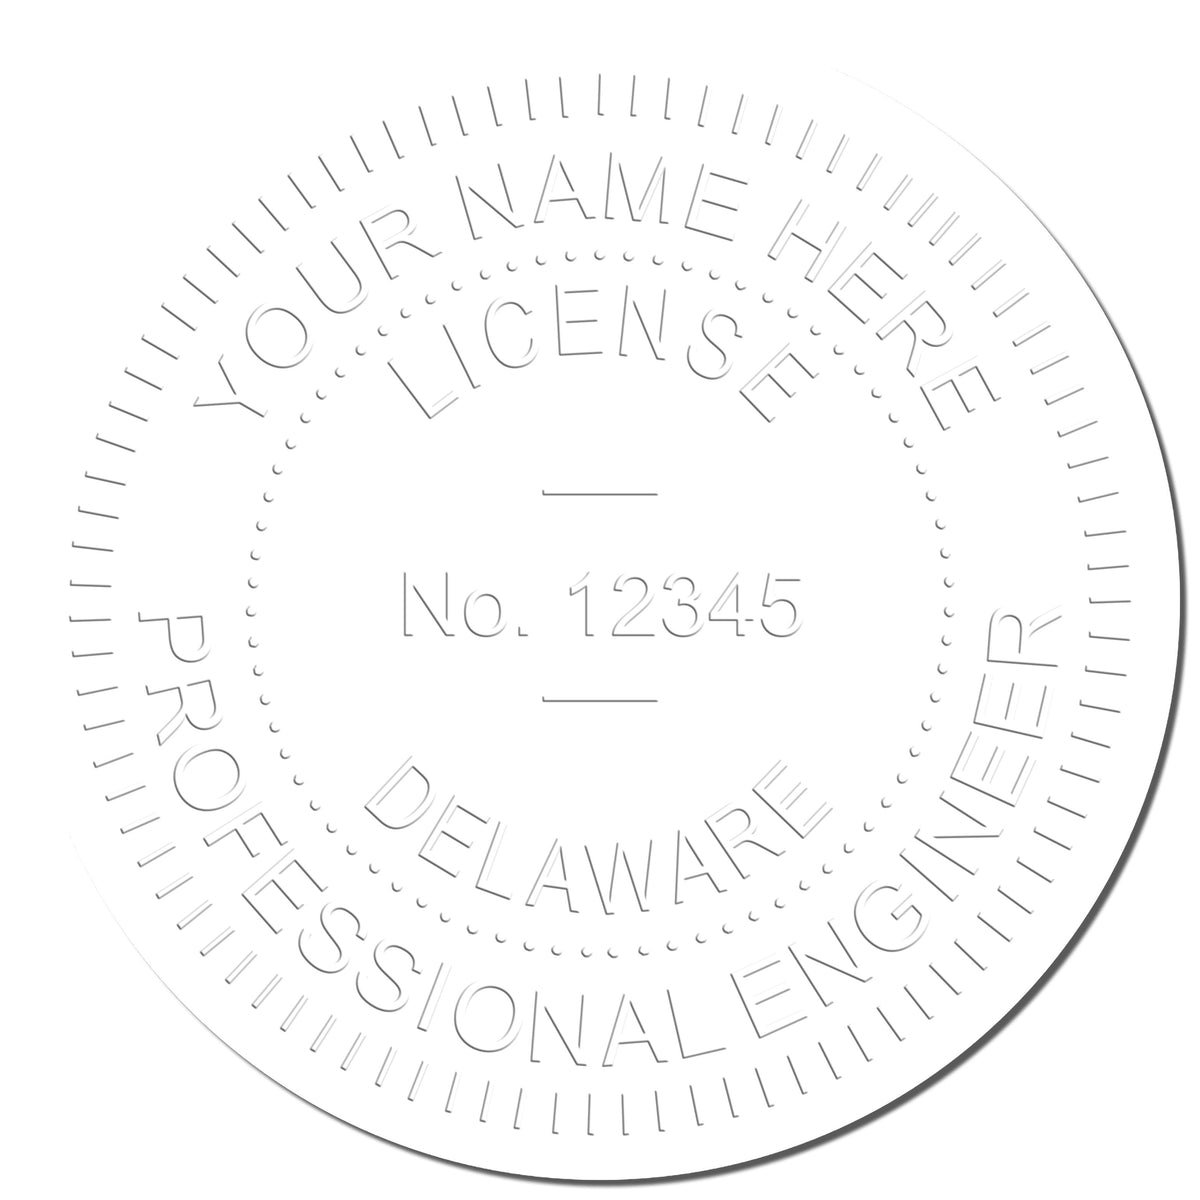 This paper is stamped with a sample imprint of the Hybrid Delaware Engineer Seal, signifying its quality and reliability.